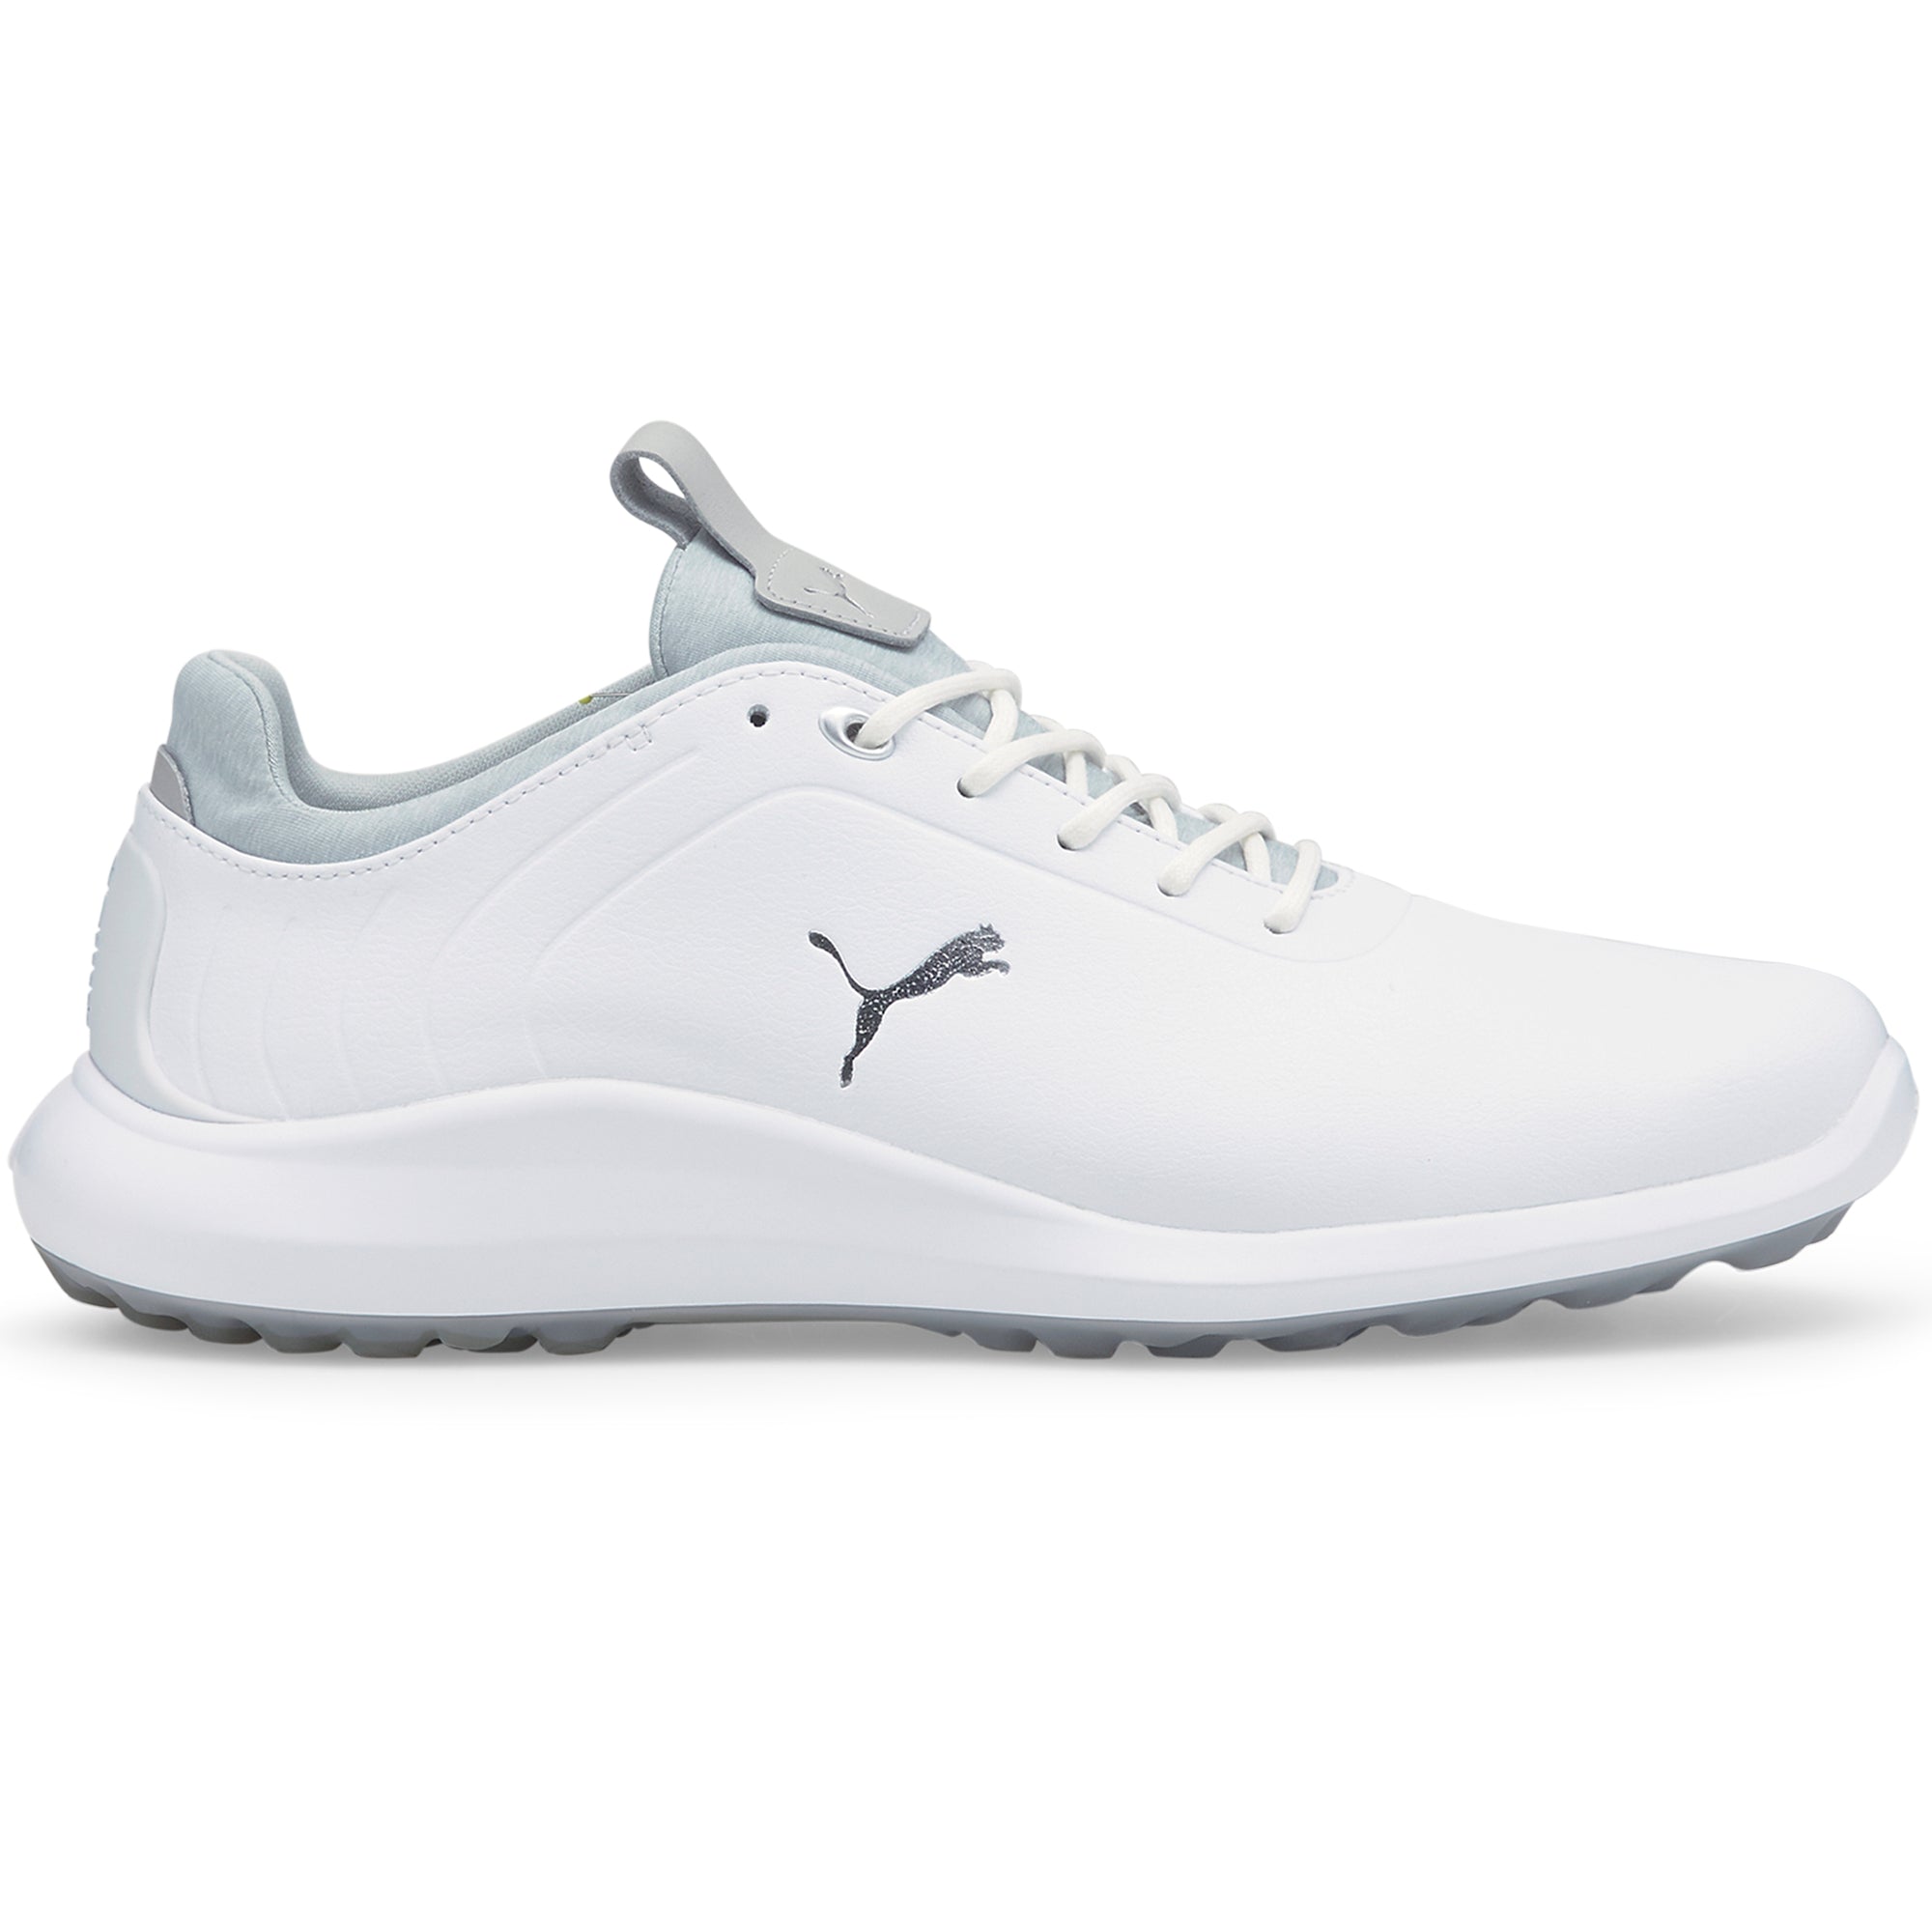 Puma Ignite Pro Golf Shoes 195031 Puma White Silver High Rise 01 |  Function18 | Restrictedgs